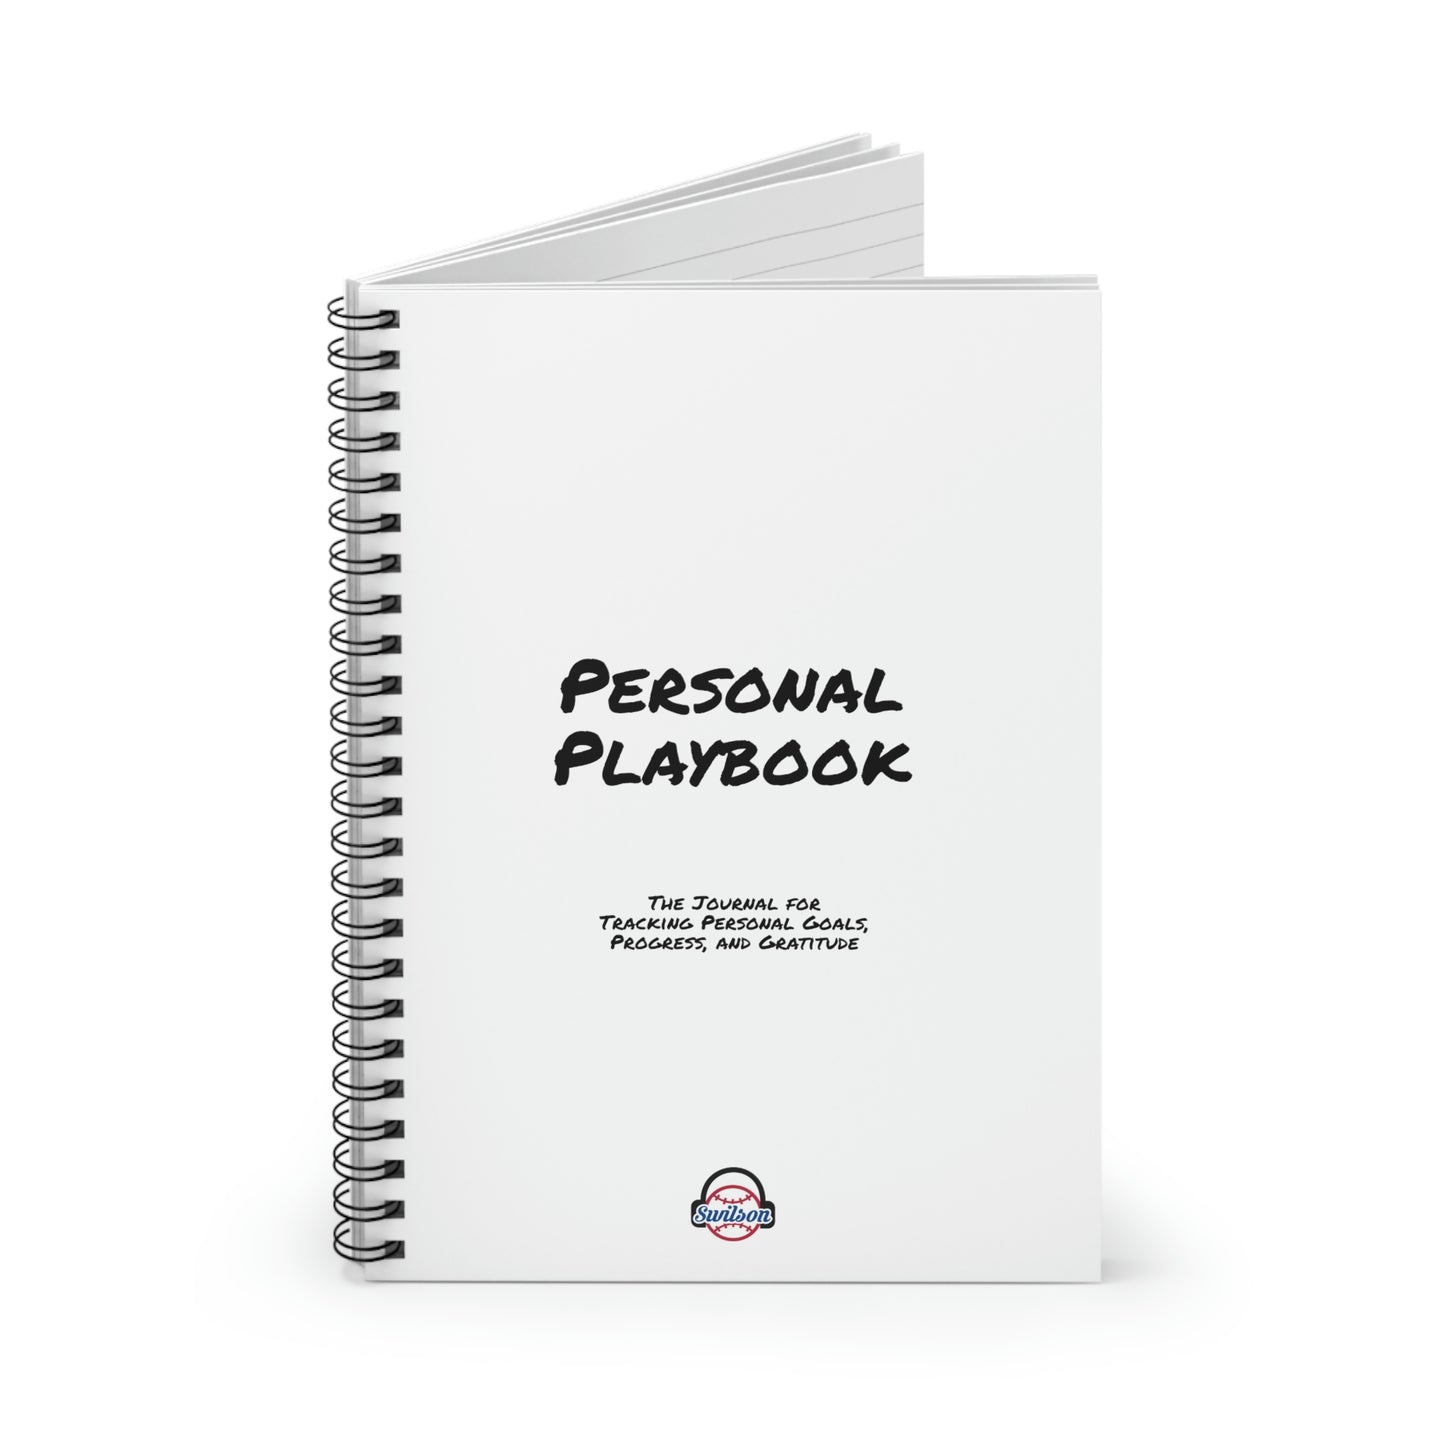 Official Swilson "Personal Playbook" Journal